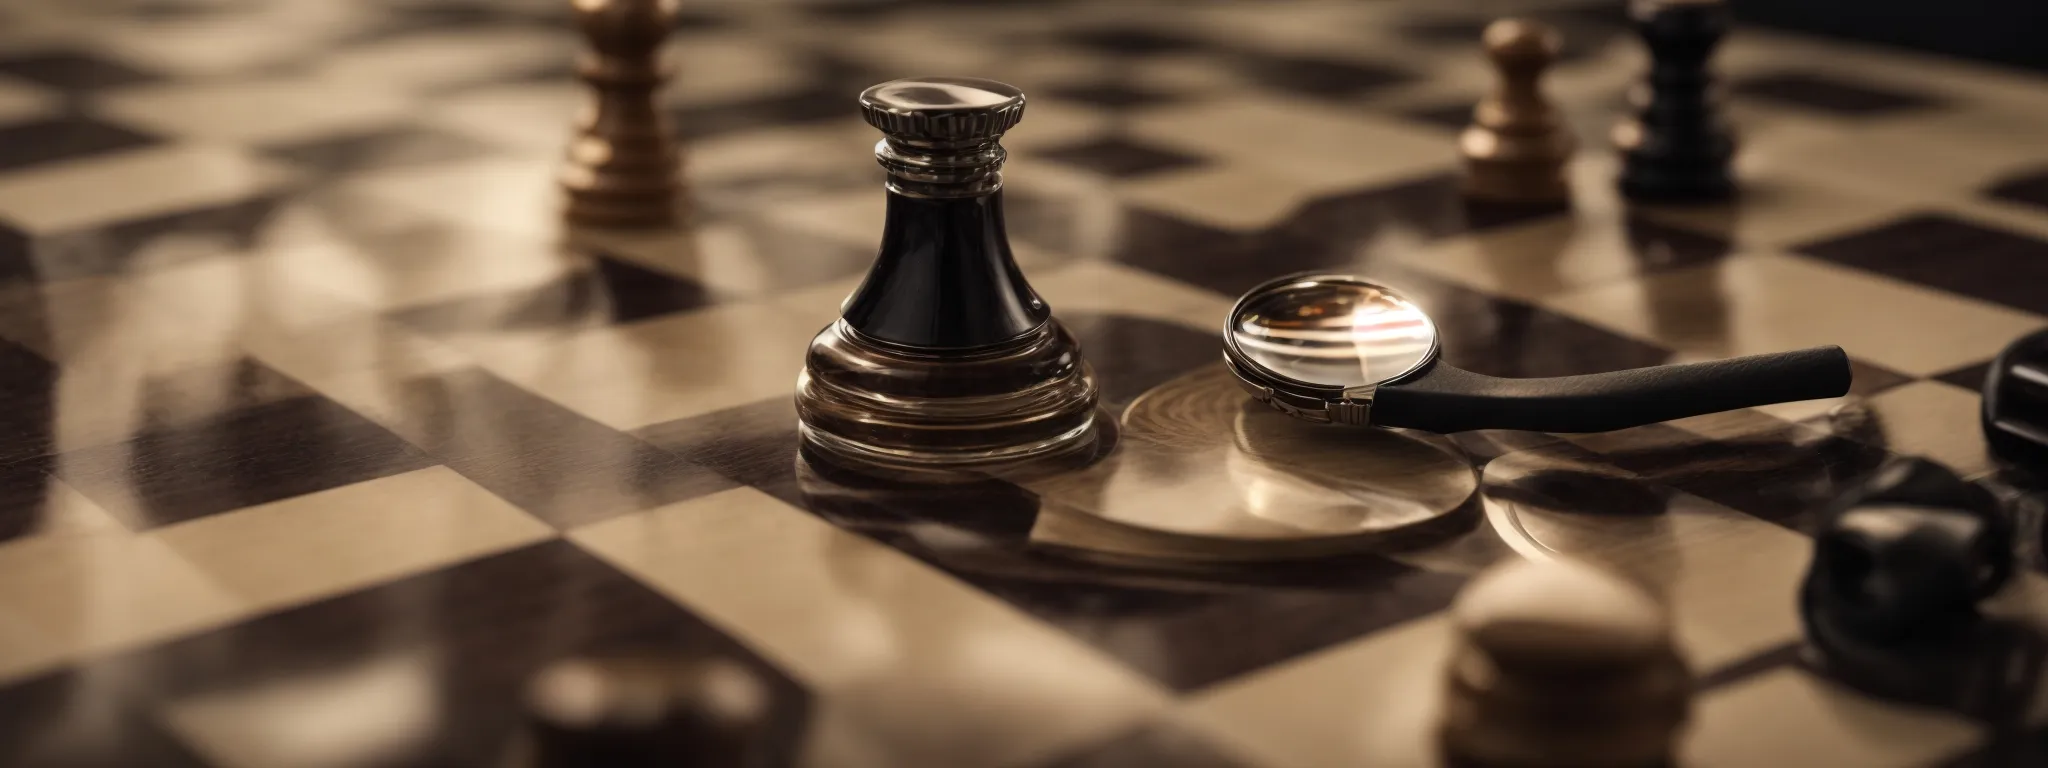 a chessboard with a magnifying glass focusing on a king piece, symbolizing strategic investment decisions in marketing.